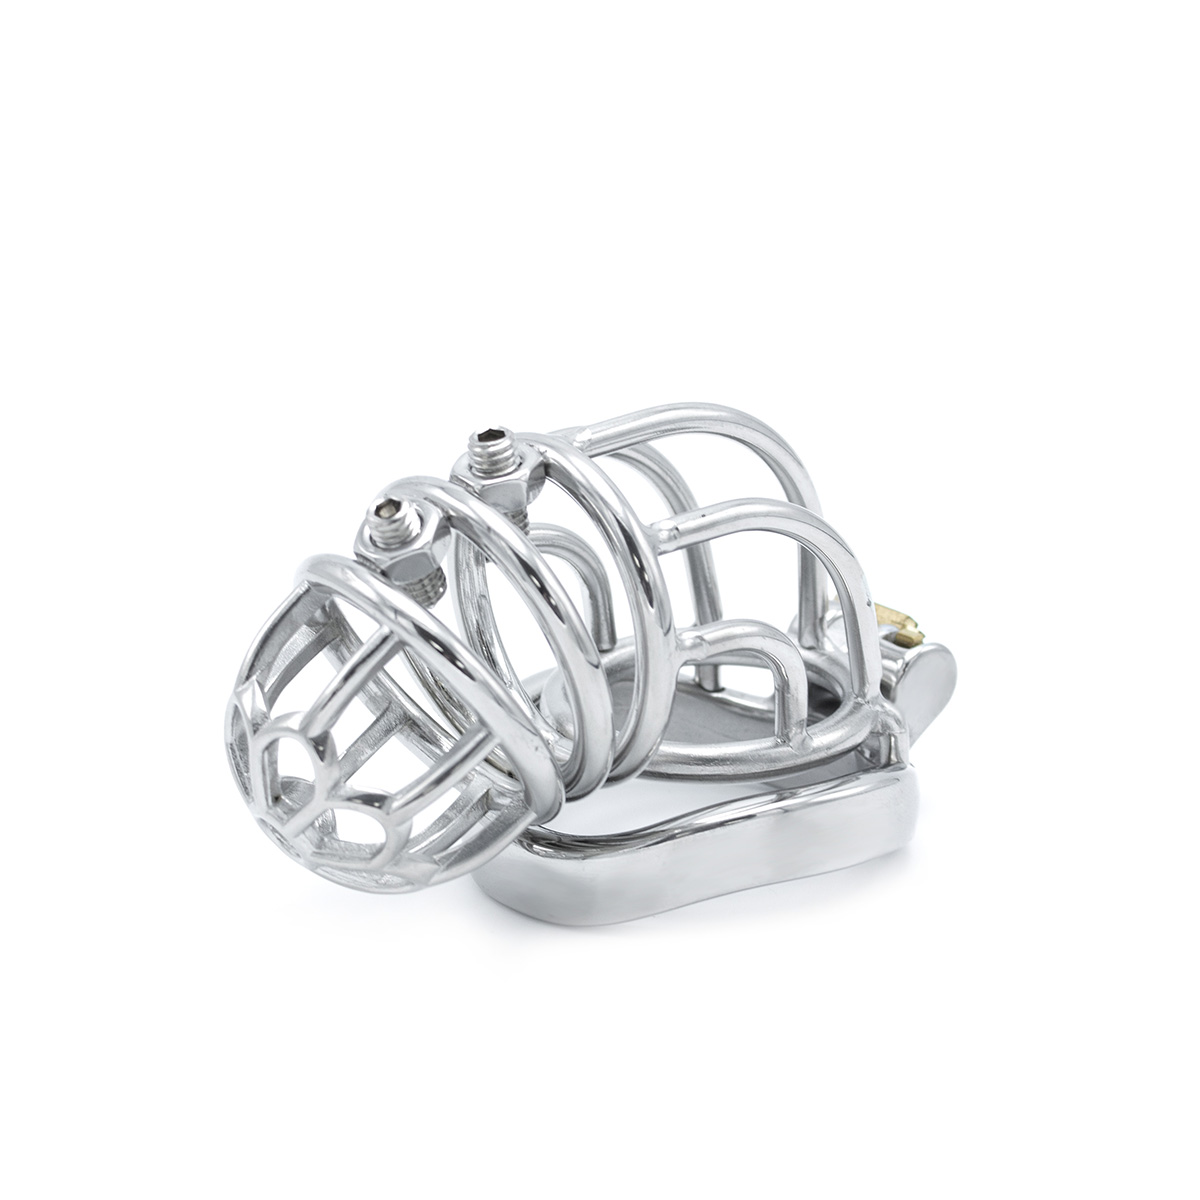 Cruve-Torture-Chastity-Device-OPR-278008-2